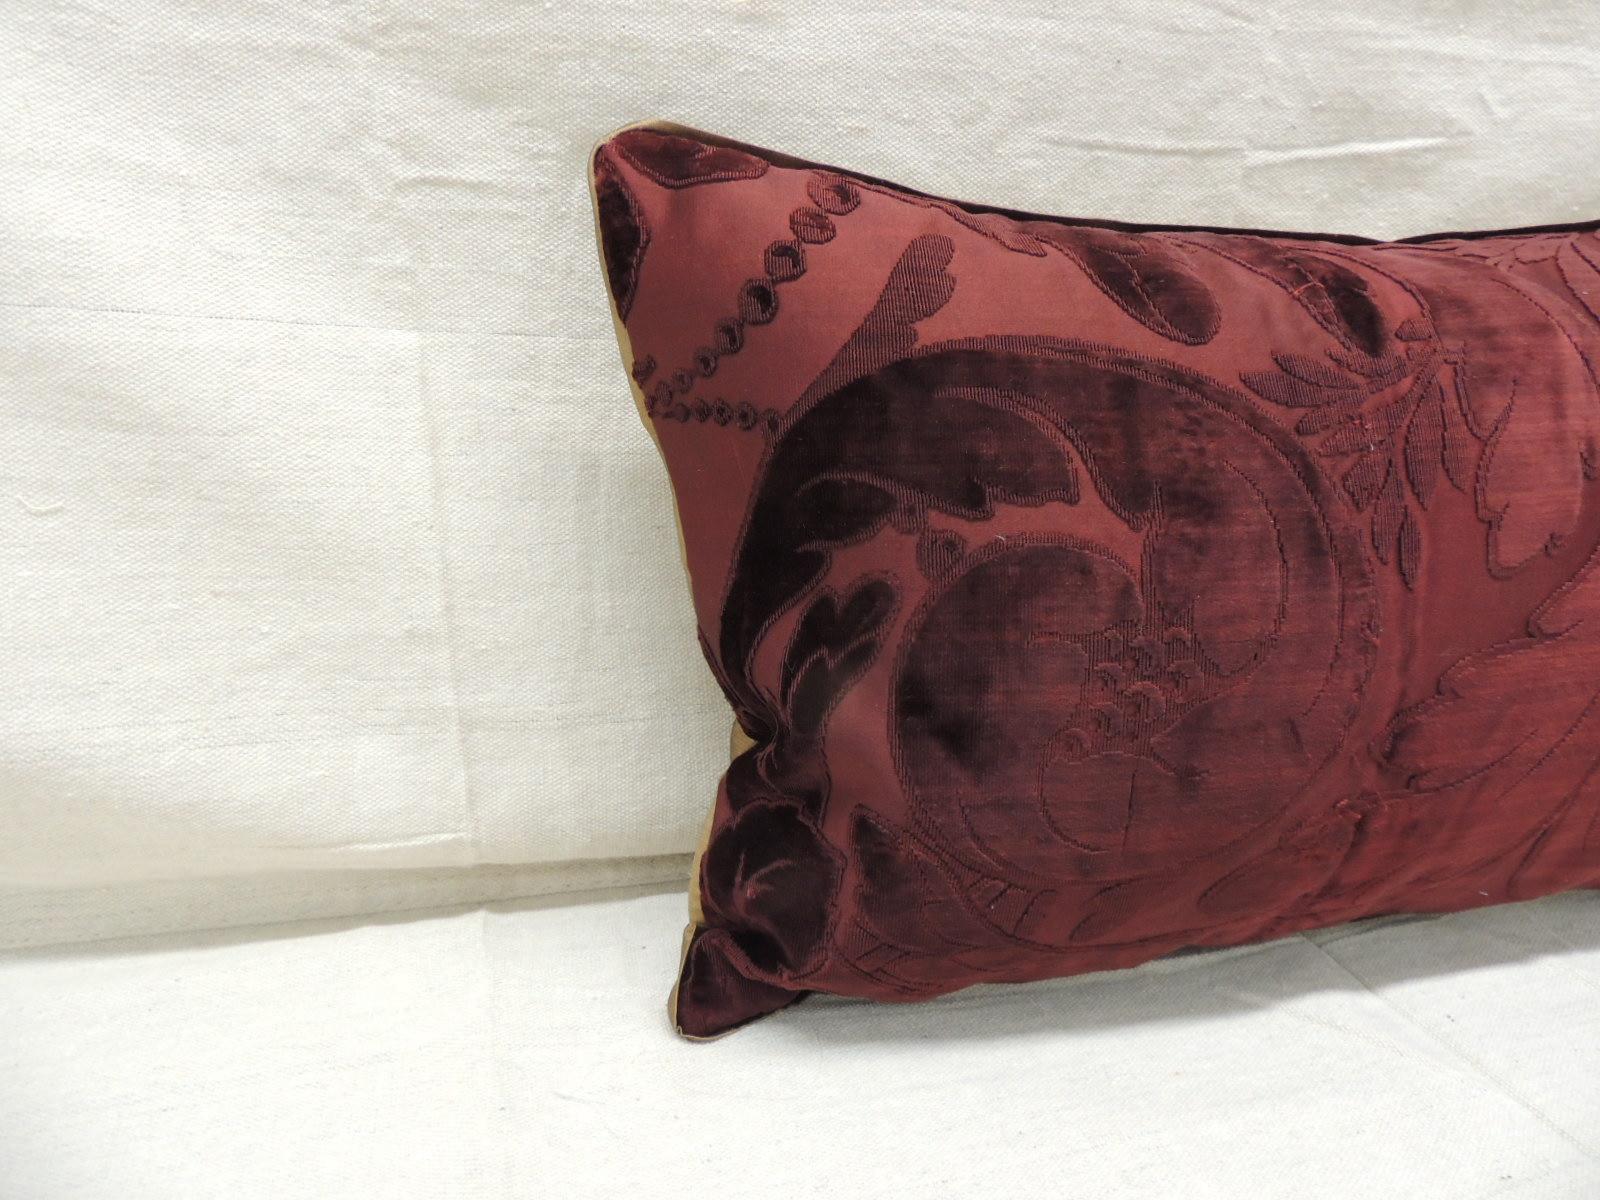 Antique Burgundy floral silk velvet lumbar decorative pillow.
Gaufrage velvet bolster with golden silk ATG custom trim and golden silk backing.
Decorative pillow handcrafted and designed in the USA.
Closure by stitch (no zipper closure) with